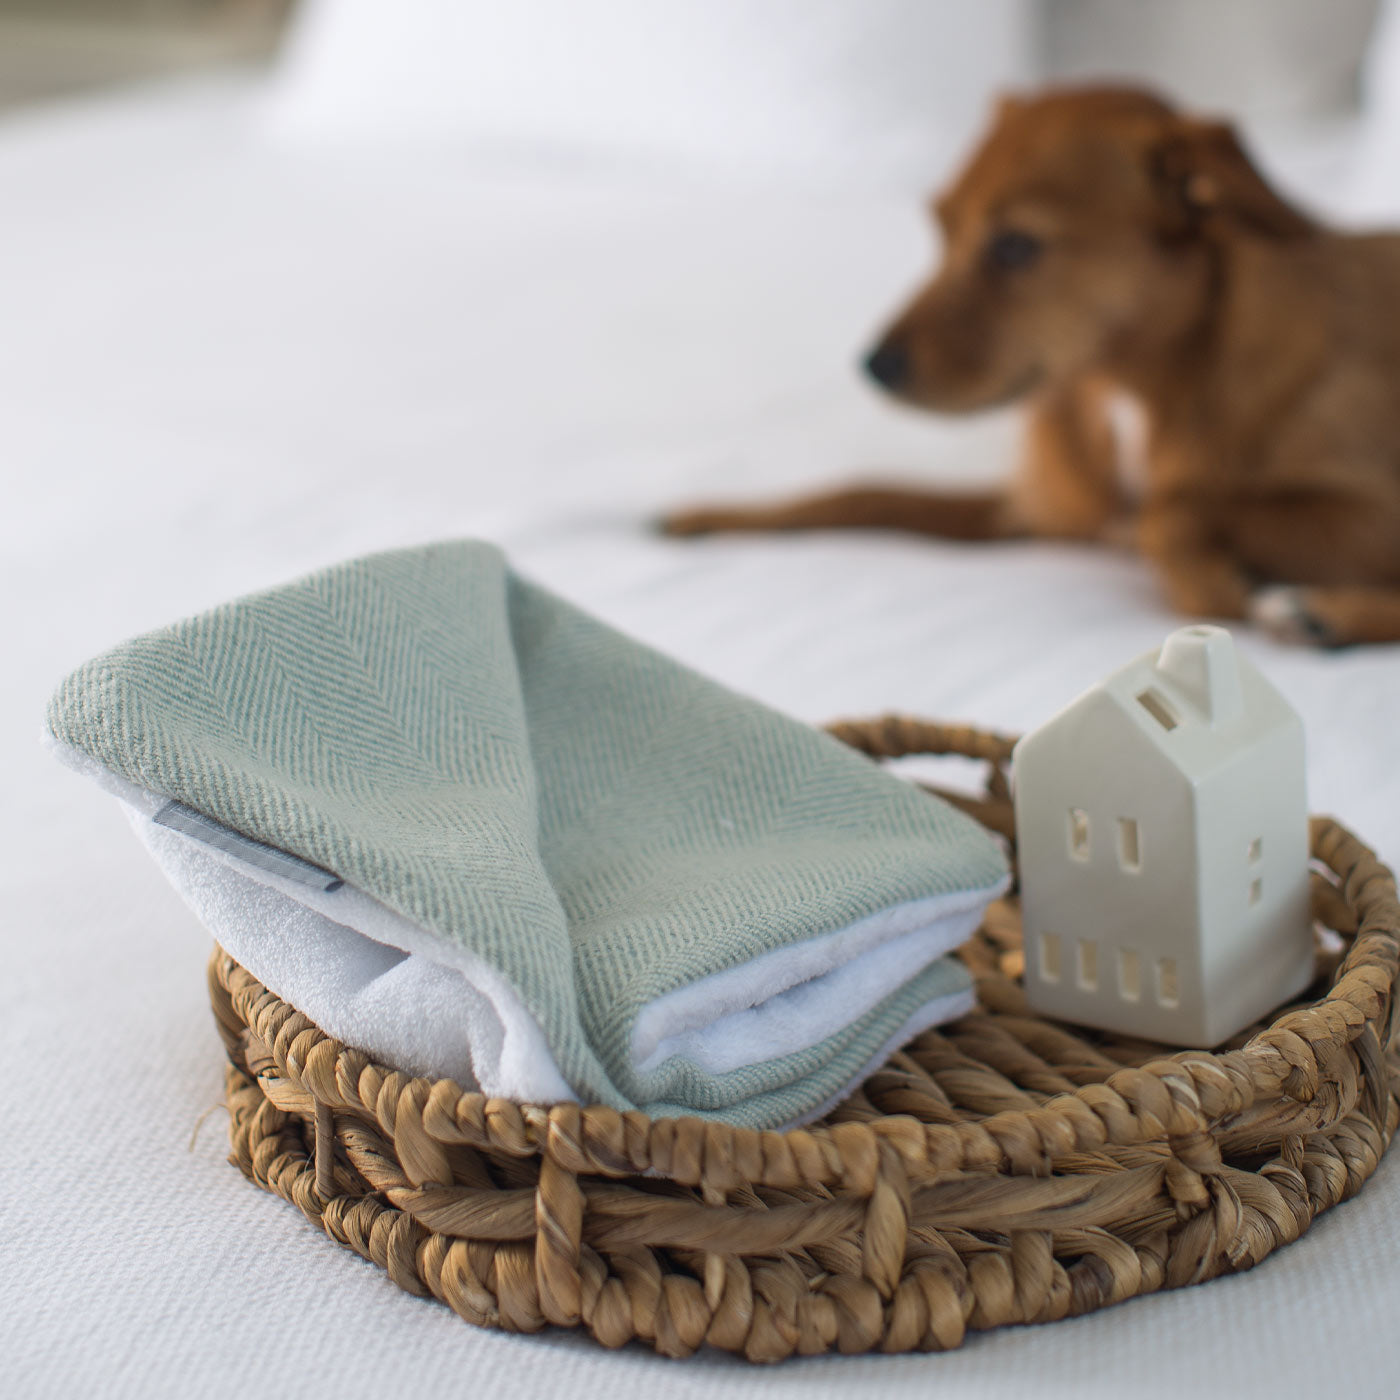 [color:duck egg herringbone] Luxury Herringbone Pet Scent Blanket collection, In Stunning Duck Egg Herringbone. The Perfect Blanket For Dogs, Available at Lords & Labradors US